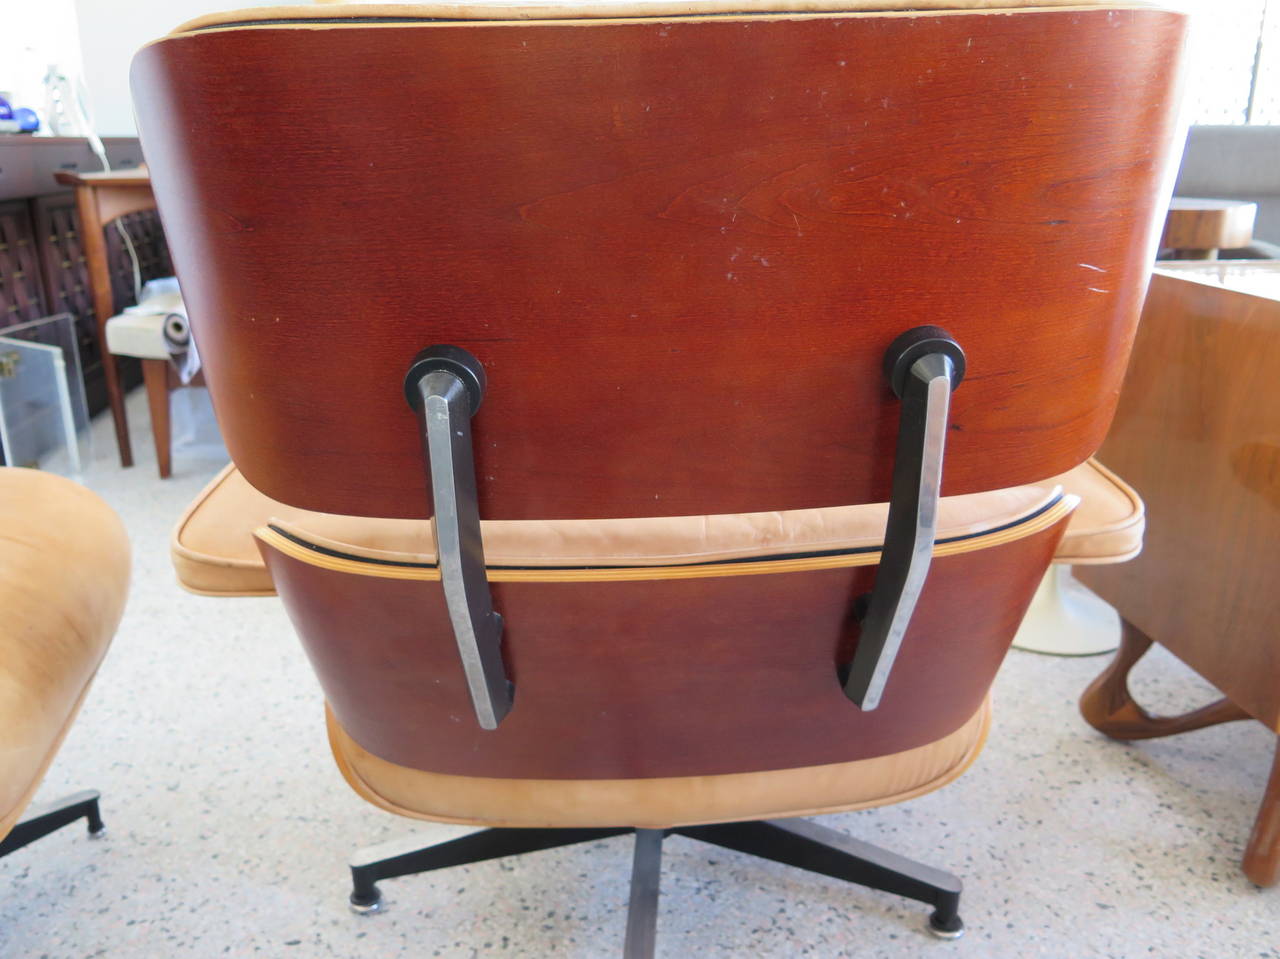 A Classic Charles Eames 670 lounge chair with two (2) ottomans. Original baseball glove patinated leather soft and supple. Walnut veneer. Signed Herman Miller and dated 1996.